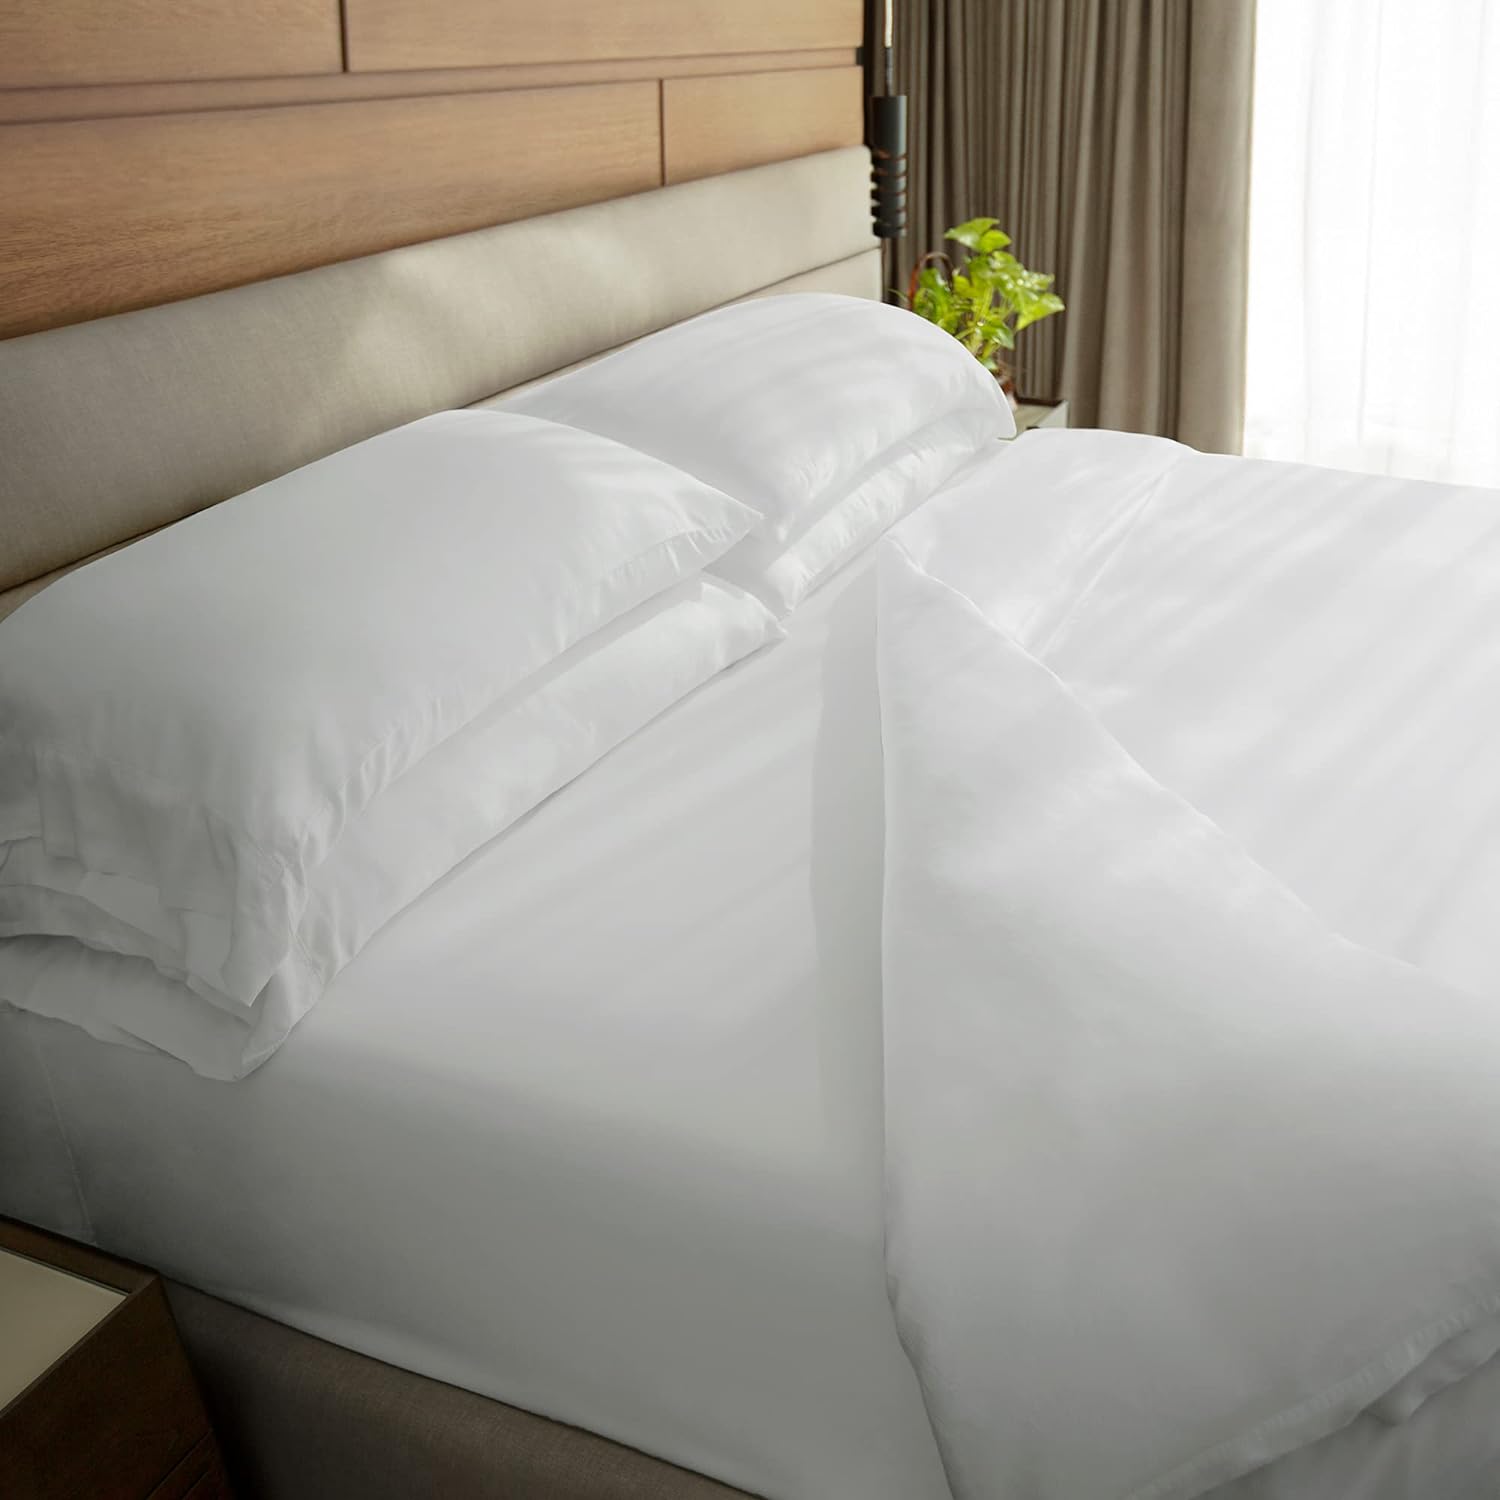 Cariloha Classic Bamboo-Viscose Bed Sheet Set-Cooling Bed Sheets-Luxuriously Soft Sheet Set with Twill Weave Finish-Includes Flat & Fitted Sheet Plus 2 Pillowcases - King - White